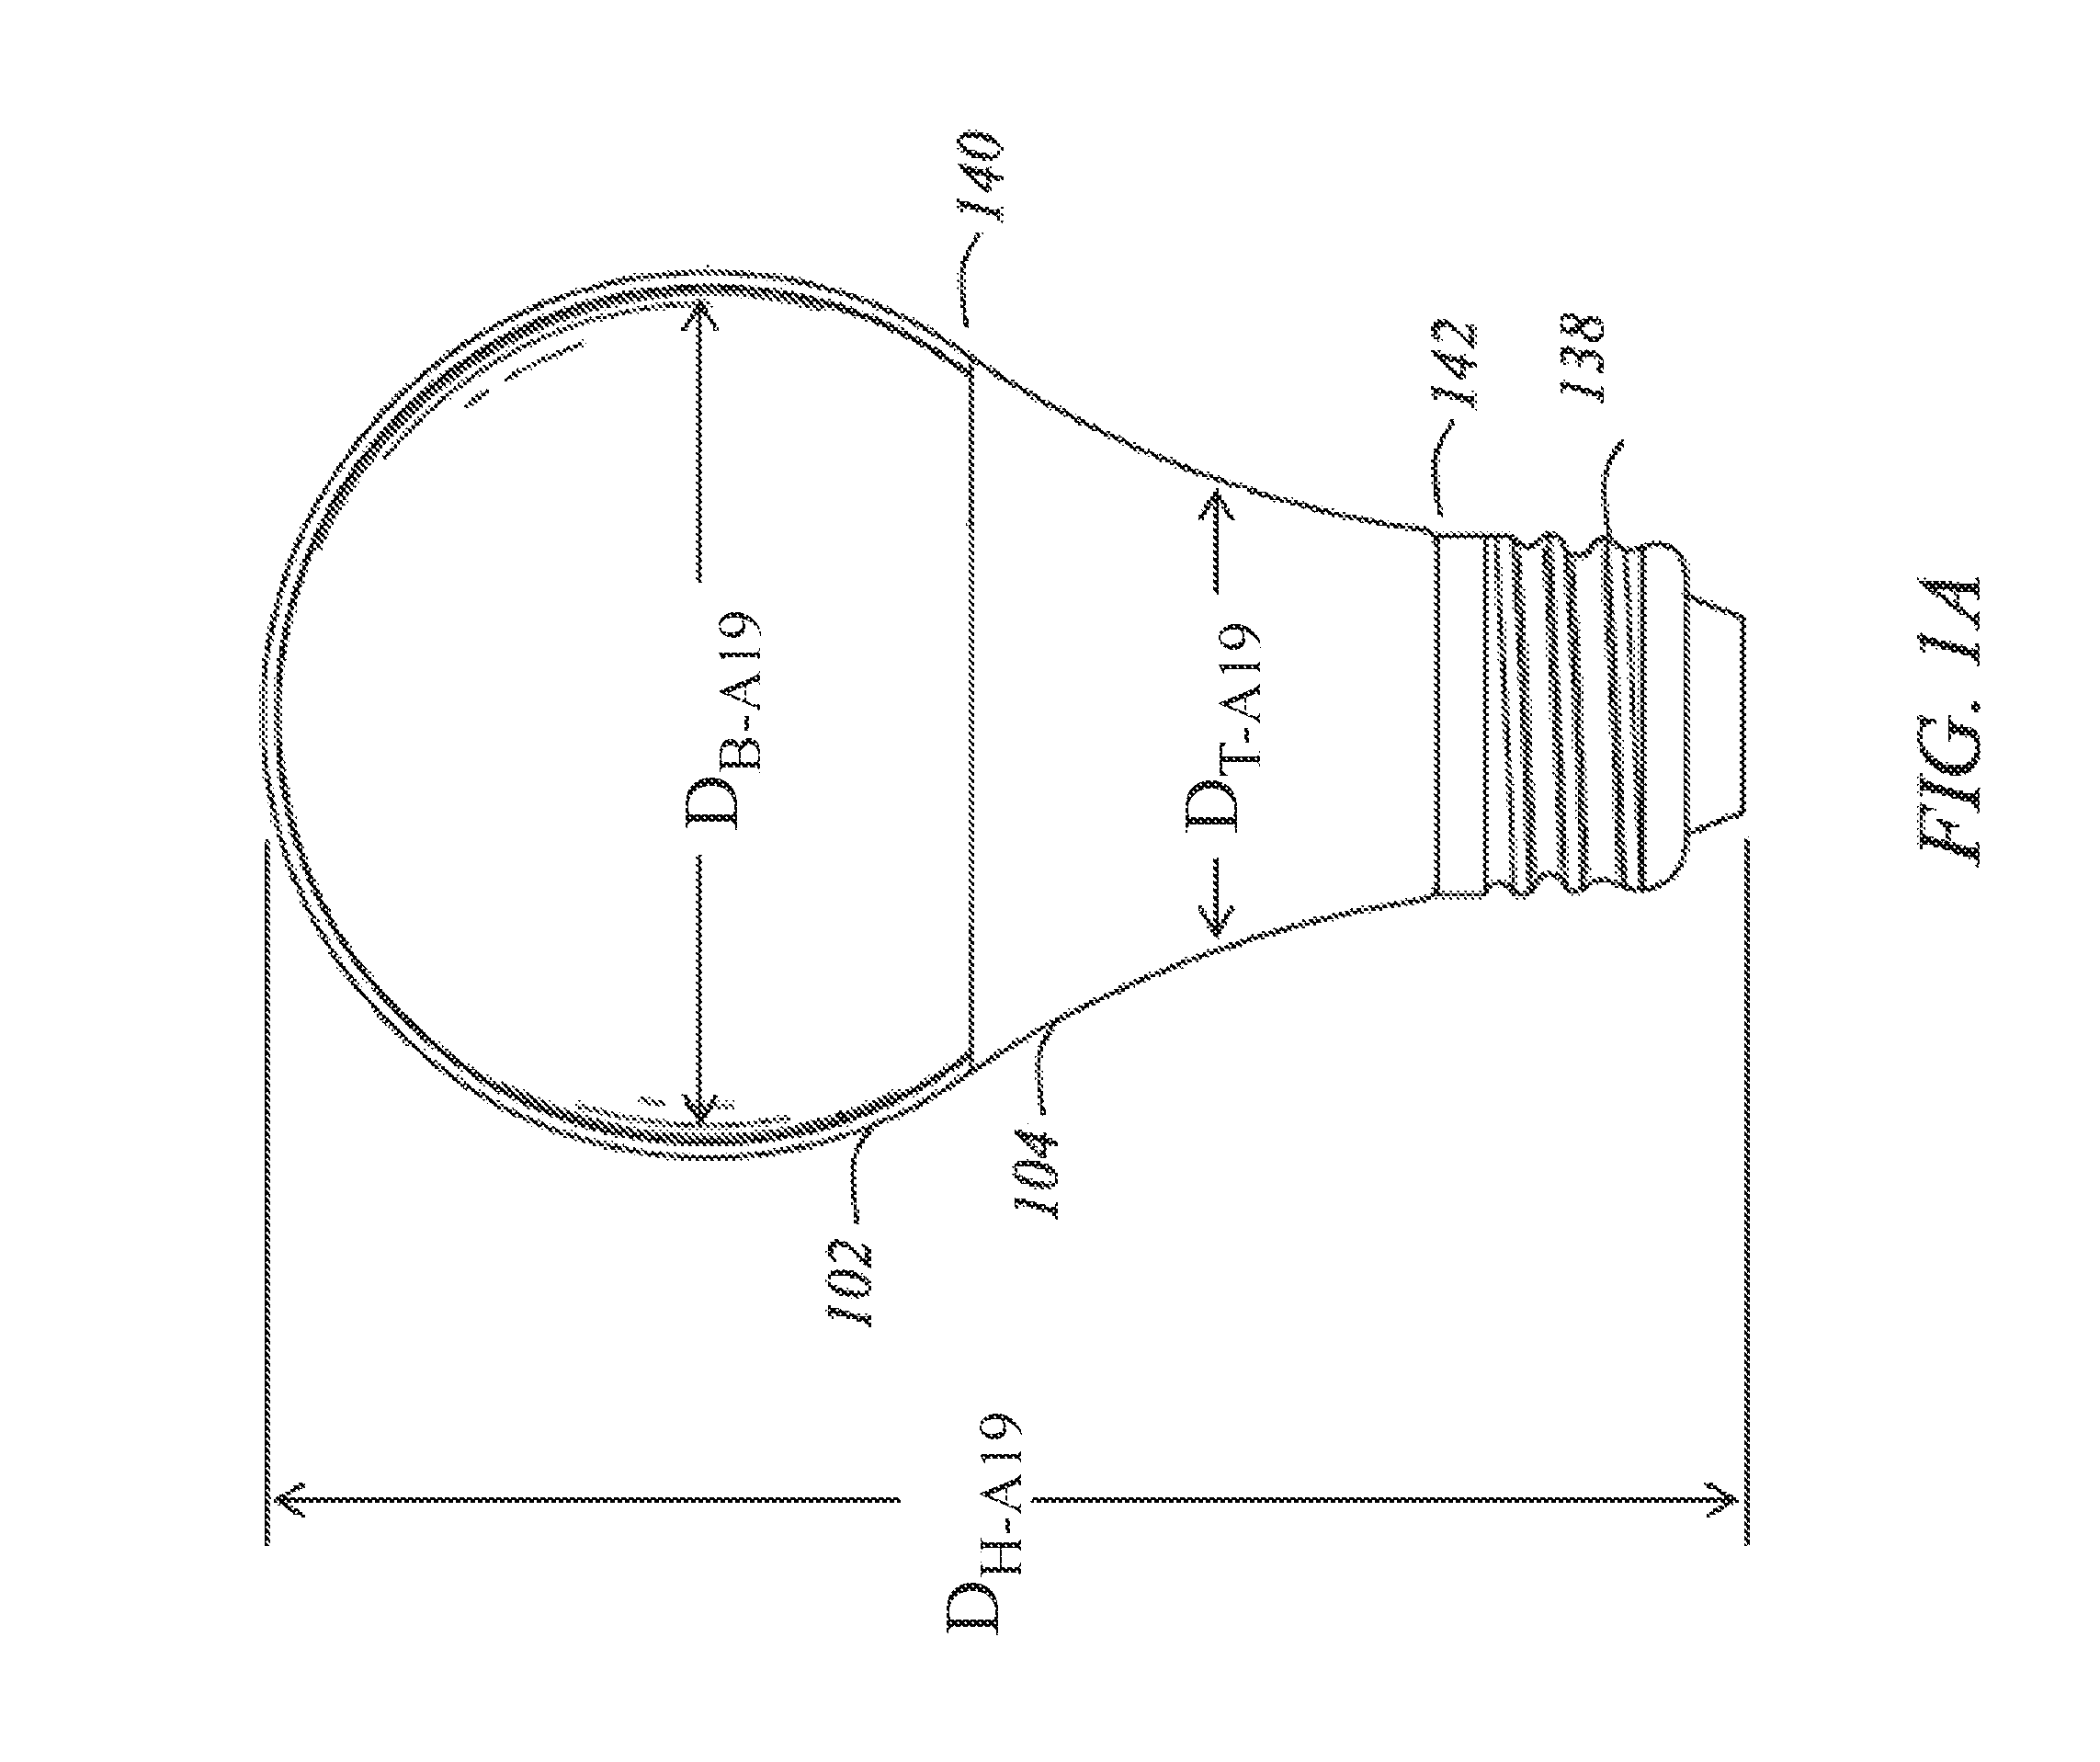 Induction RF fluorescent lamp with load control for external dimming device